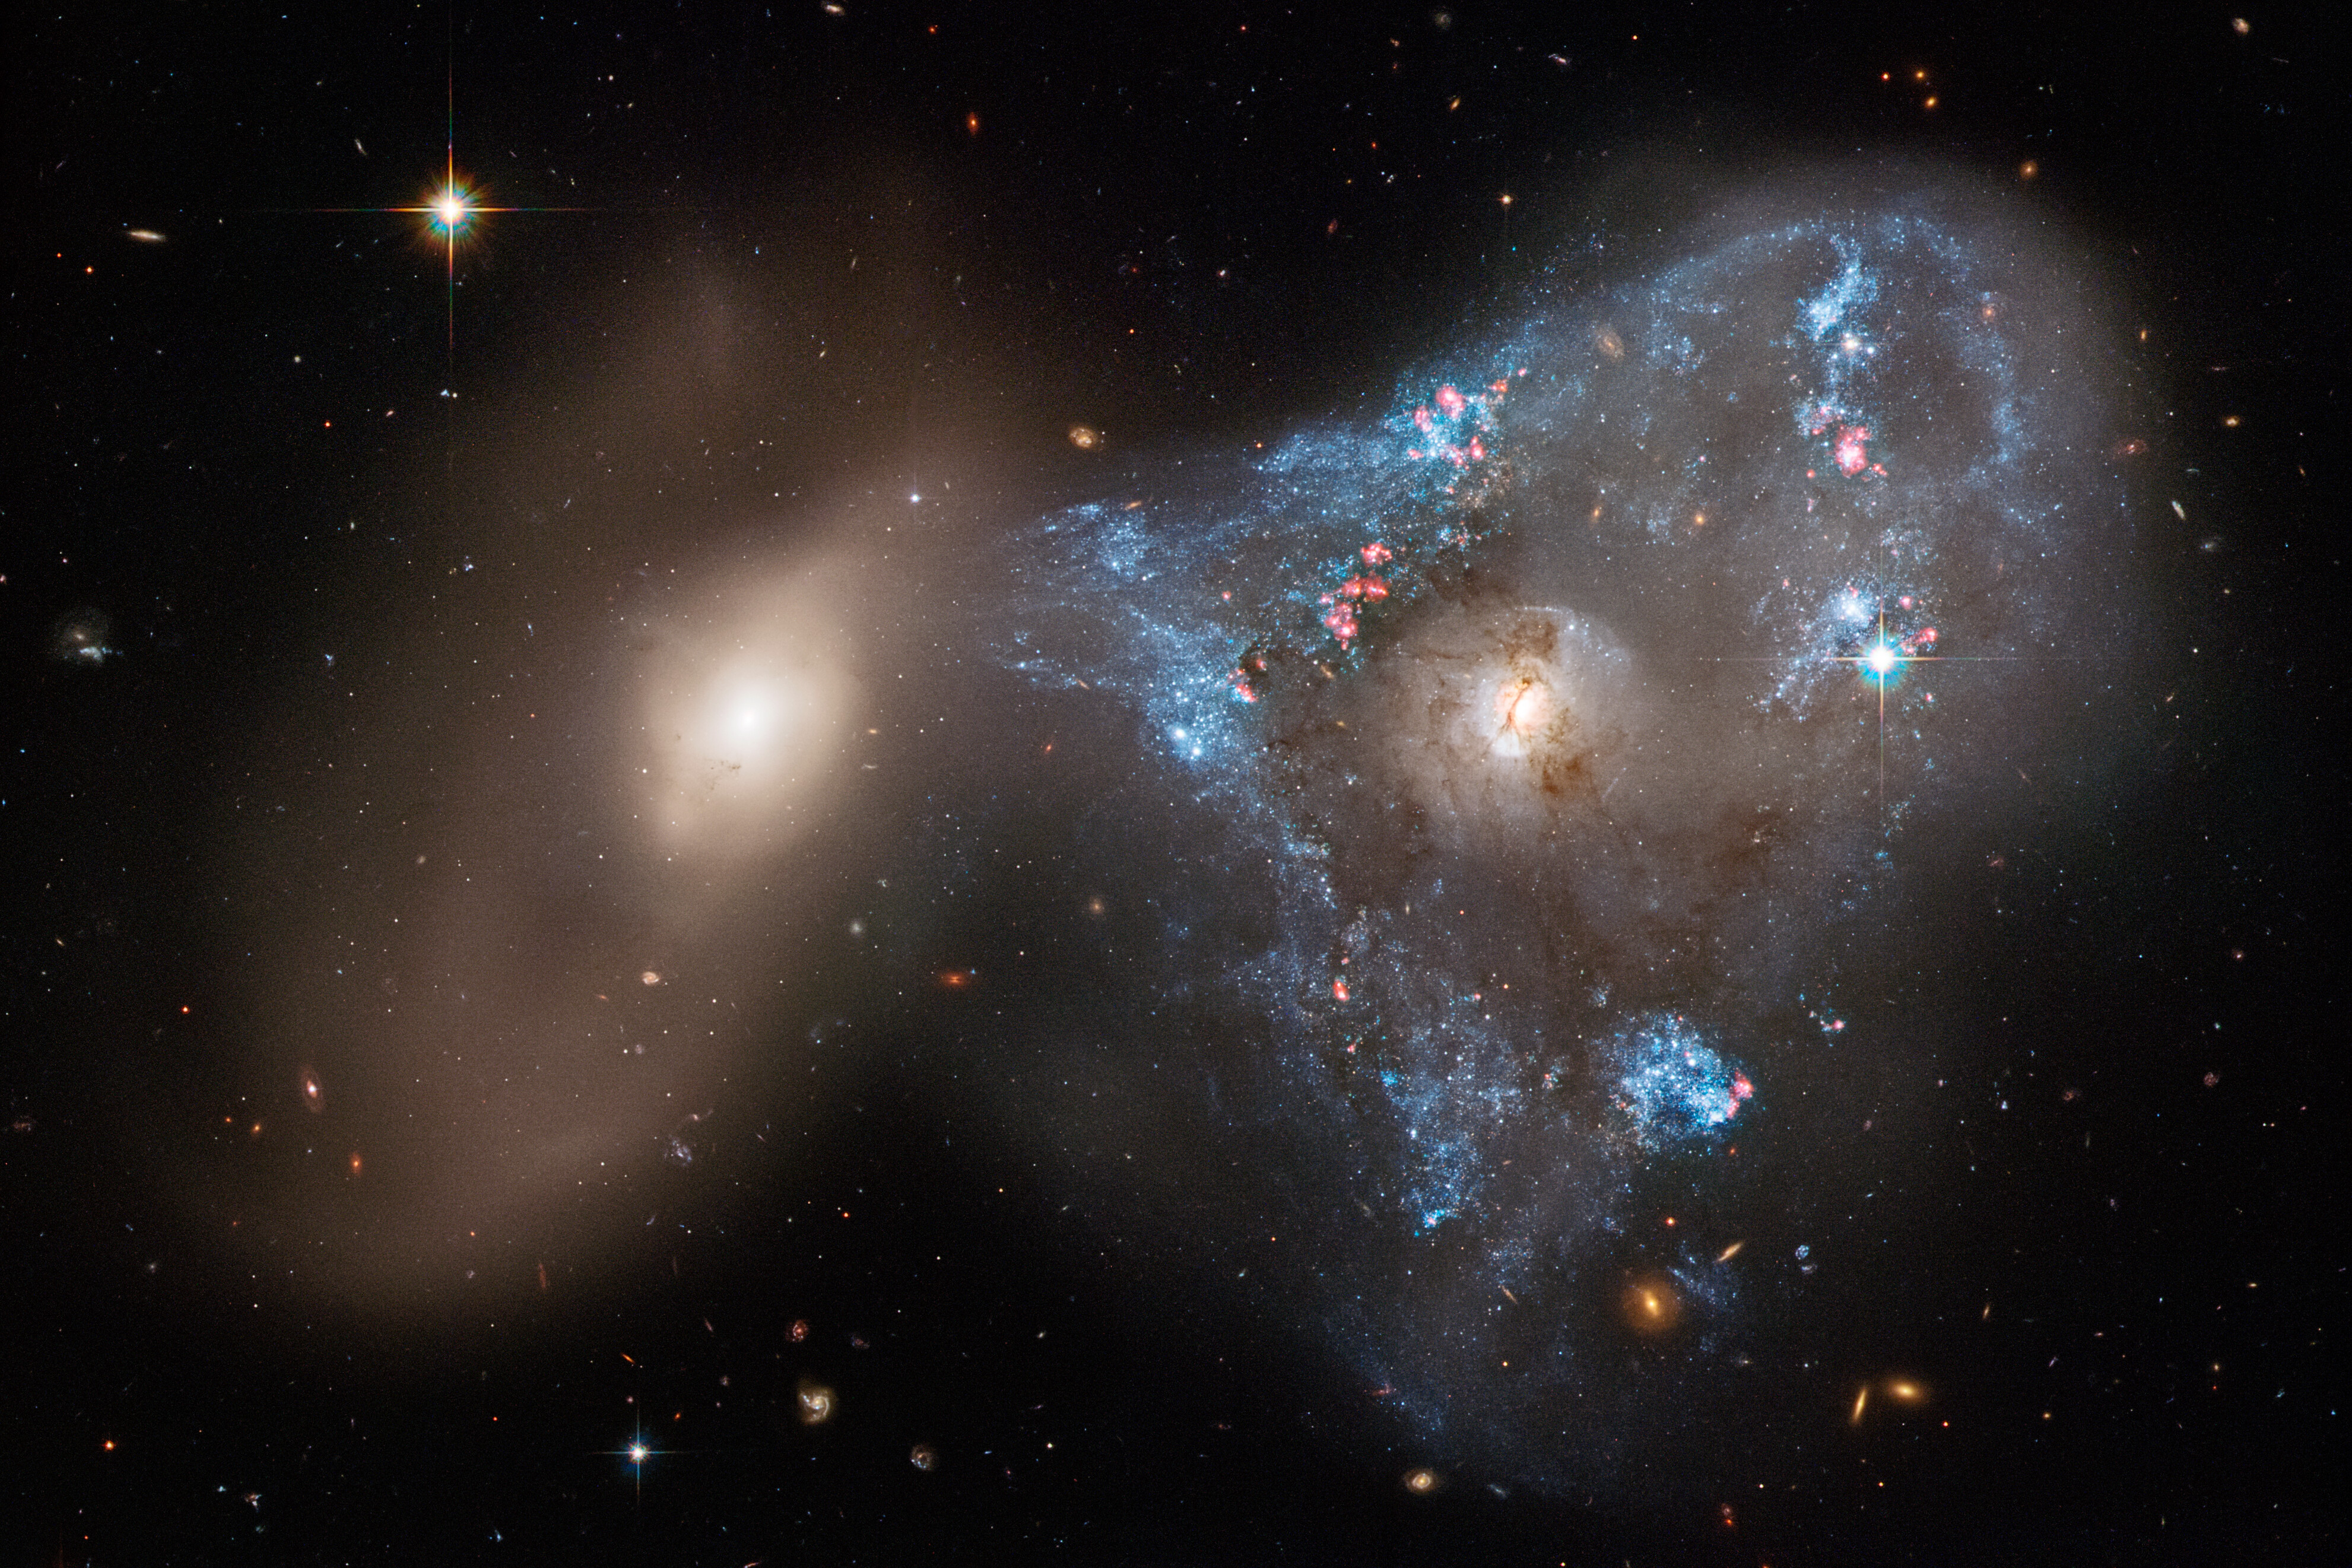 A spectacular head-on collision between two galaxies, known as Arp 143, has fueled the unusual triangular-shaped star-formation frenzy as captured by the NASA/ESA Hubble Space Telescope.  The interacting galaxy duo Arp 143 contains the distorted, star-forming spiral galaxy NGC 2445, at right, along with its less flashy companion, NGC 2444, at left. Their frenzied collision takes place against the tapestry of distant galaxies, of which some can be seen through the interacting pair.